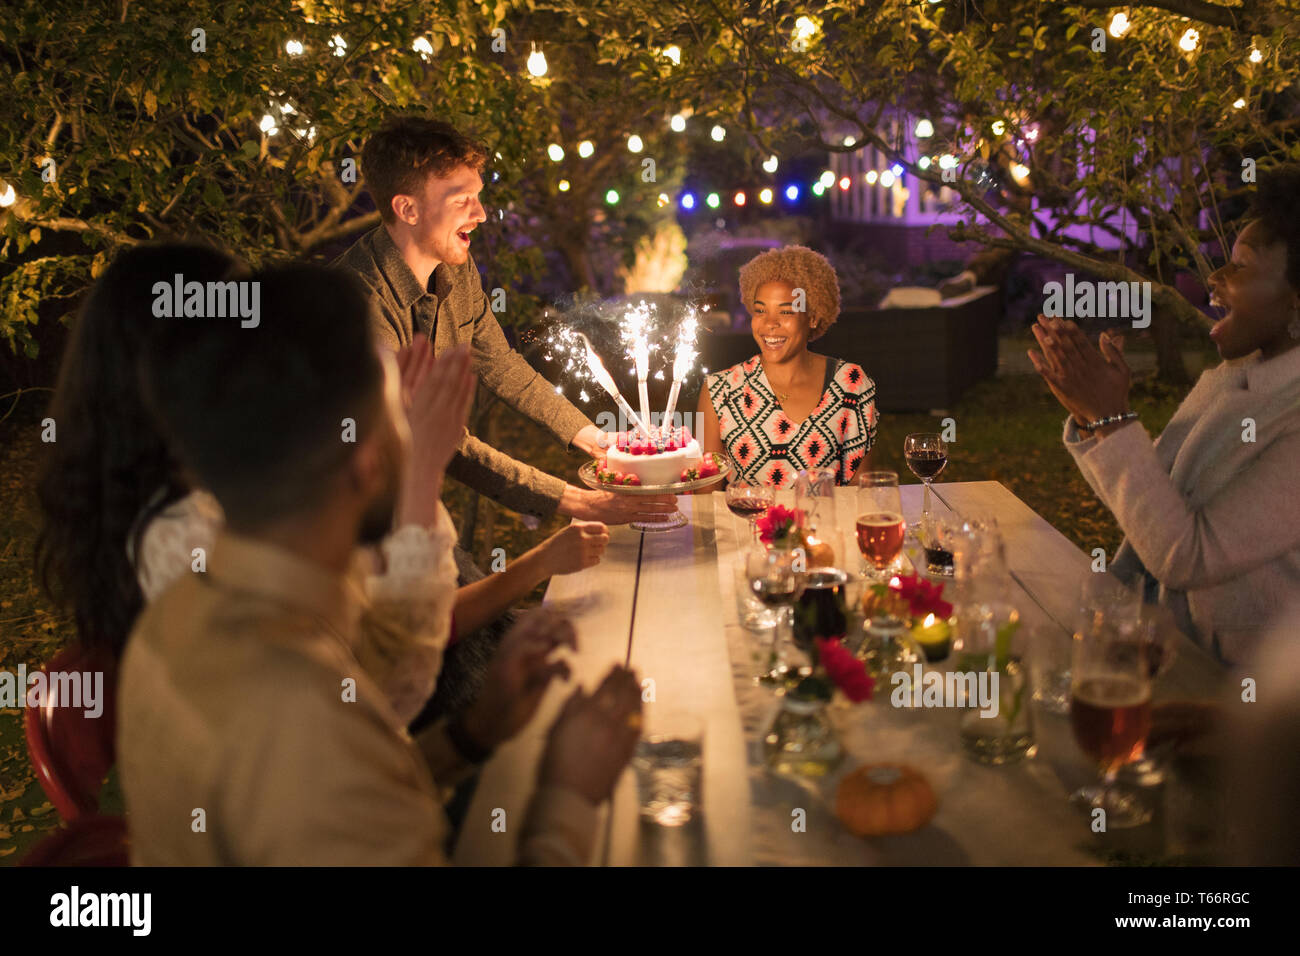 Happy friends celebrating birthday with sparkler cake at garden party table Stock Photo